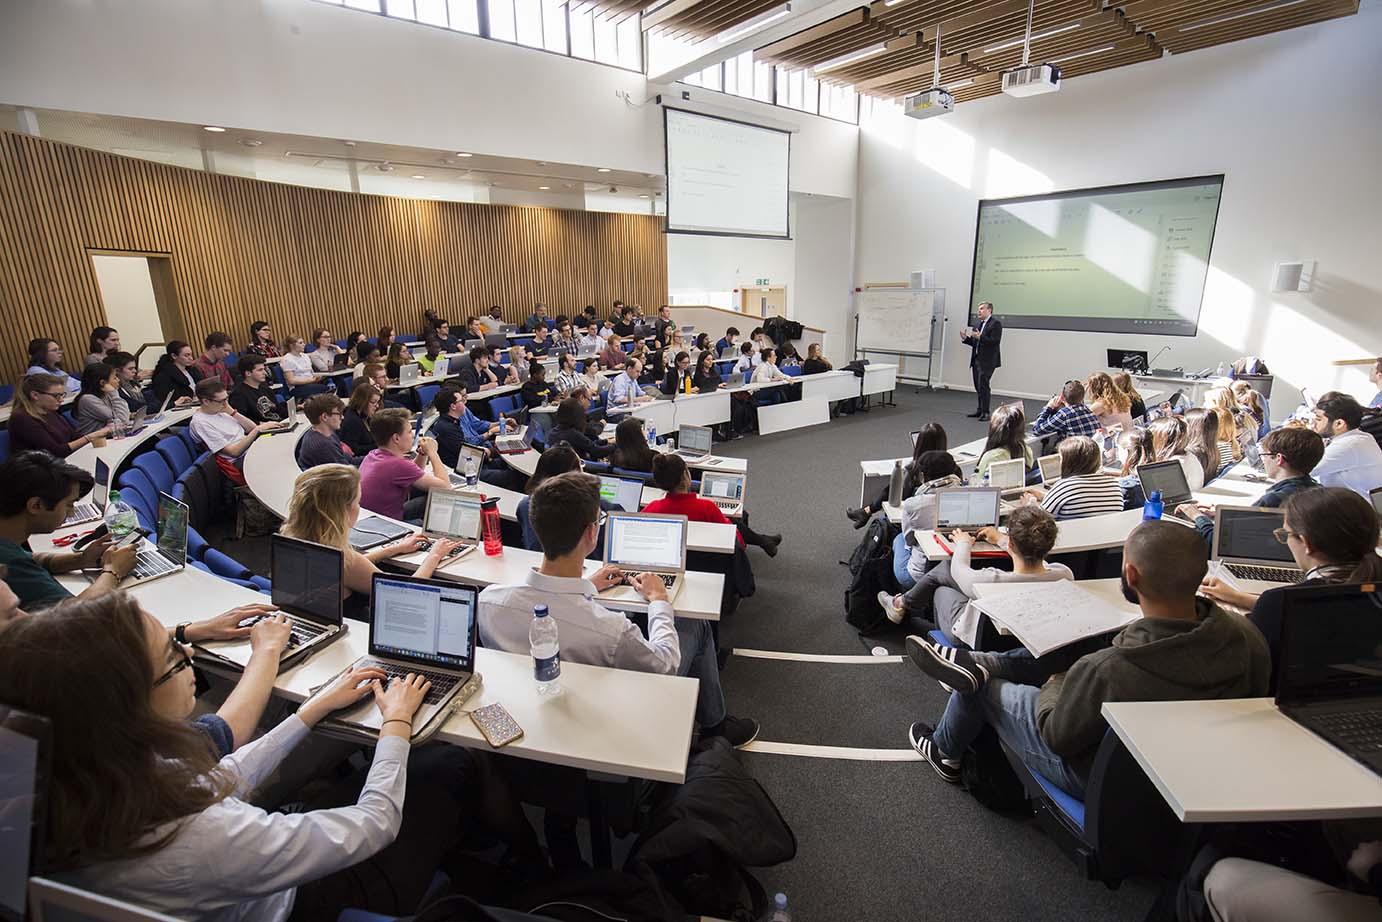 Back view of a lecture hall overlooking students attending a lecture